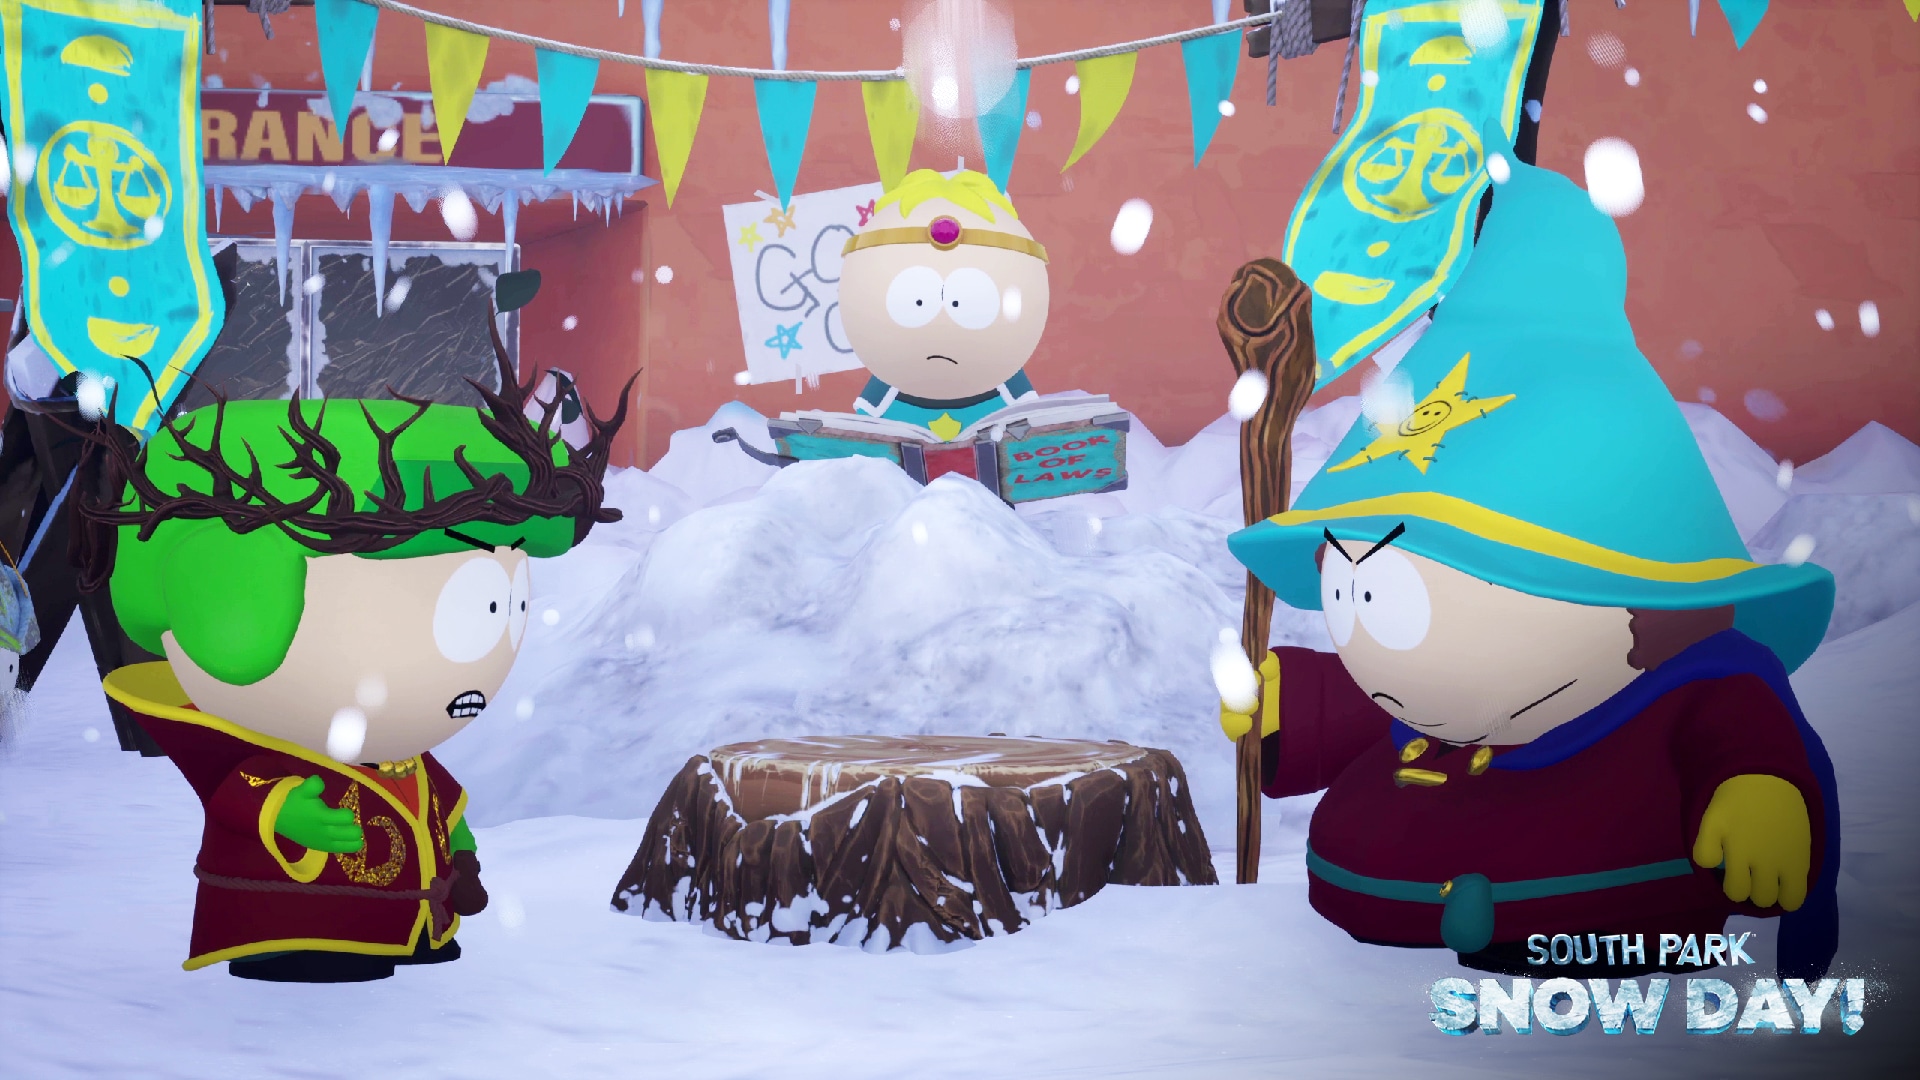 South Park Snow Day! Release Date